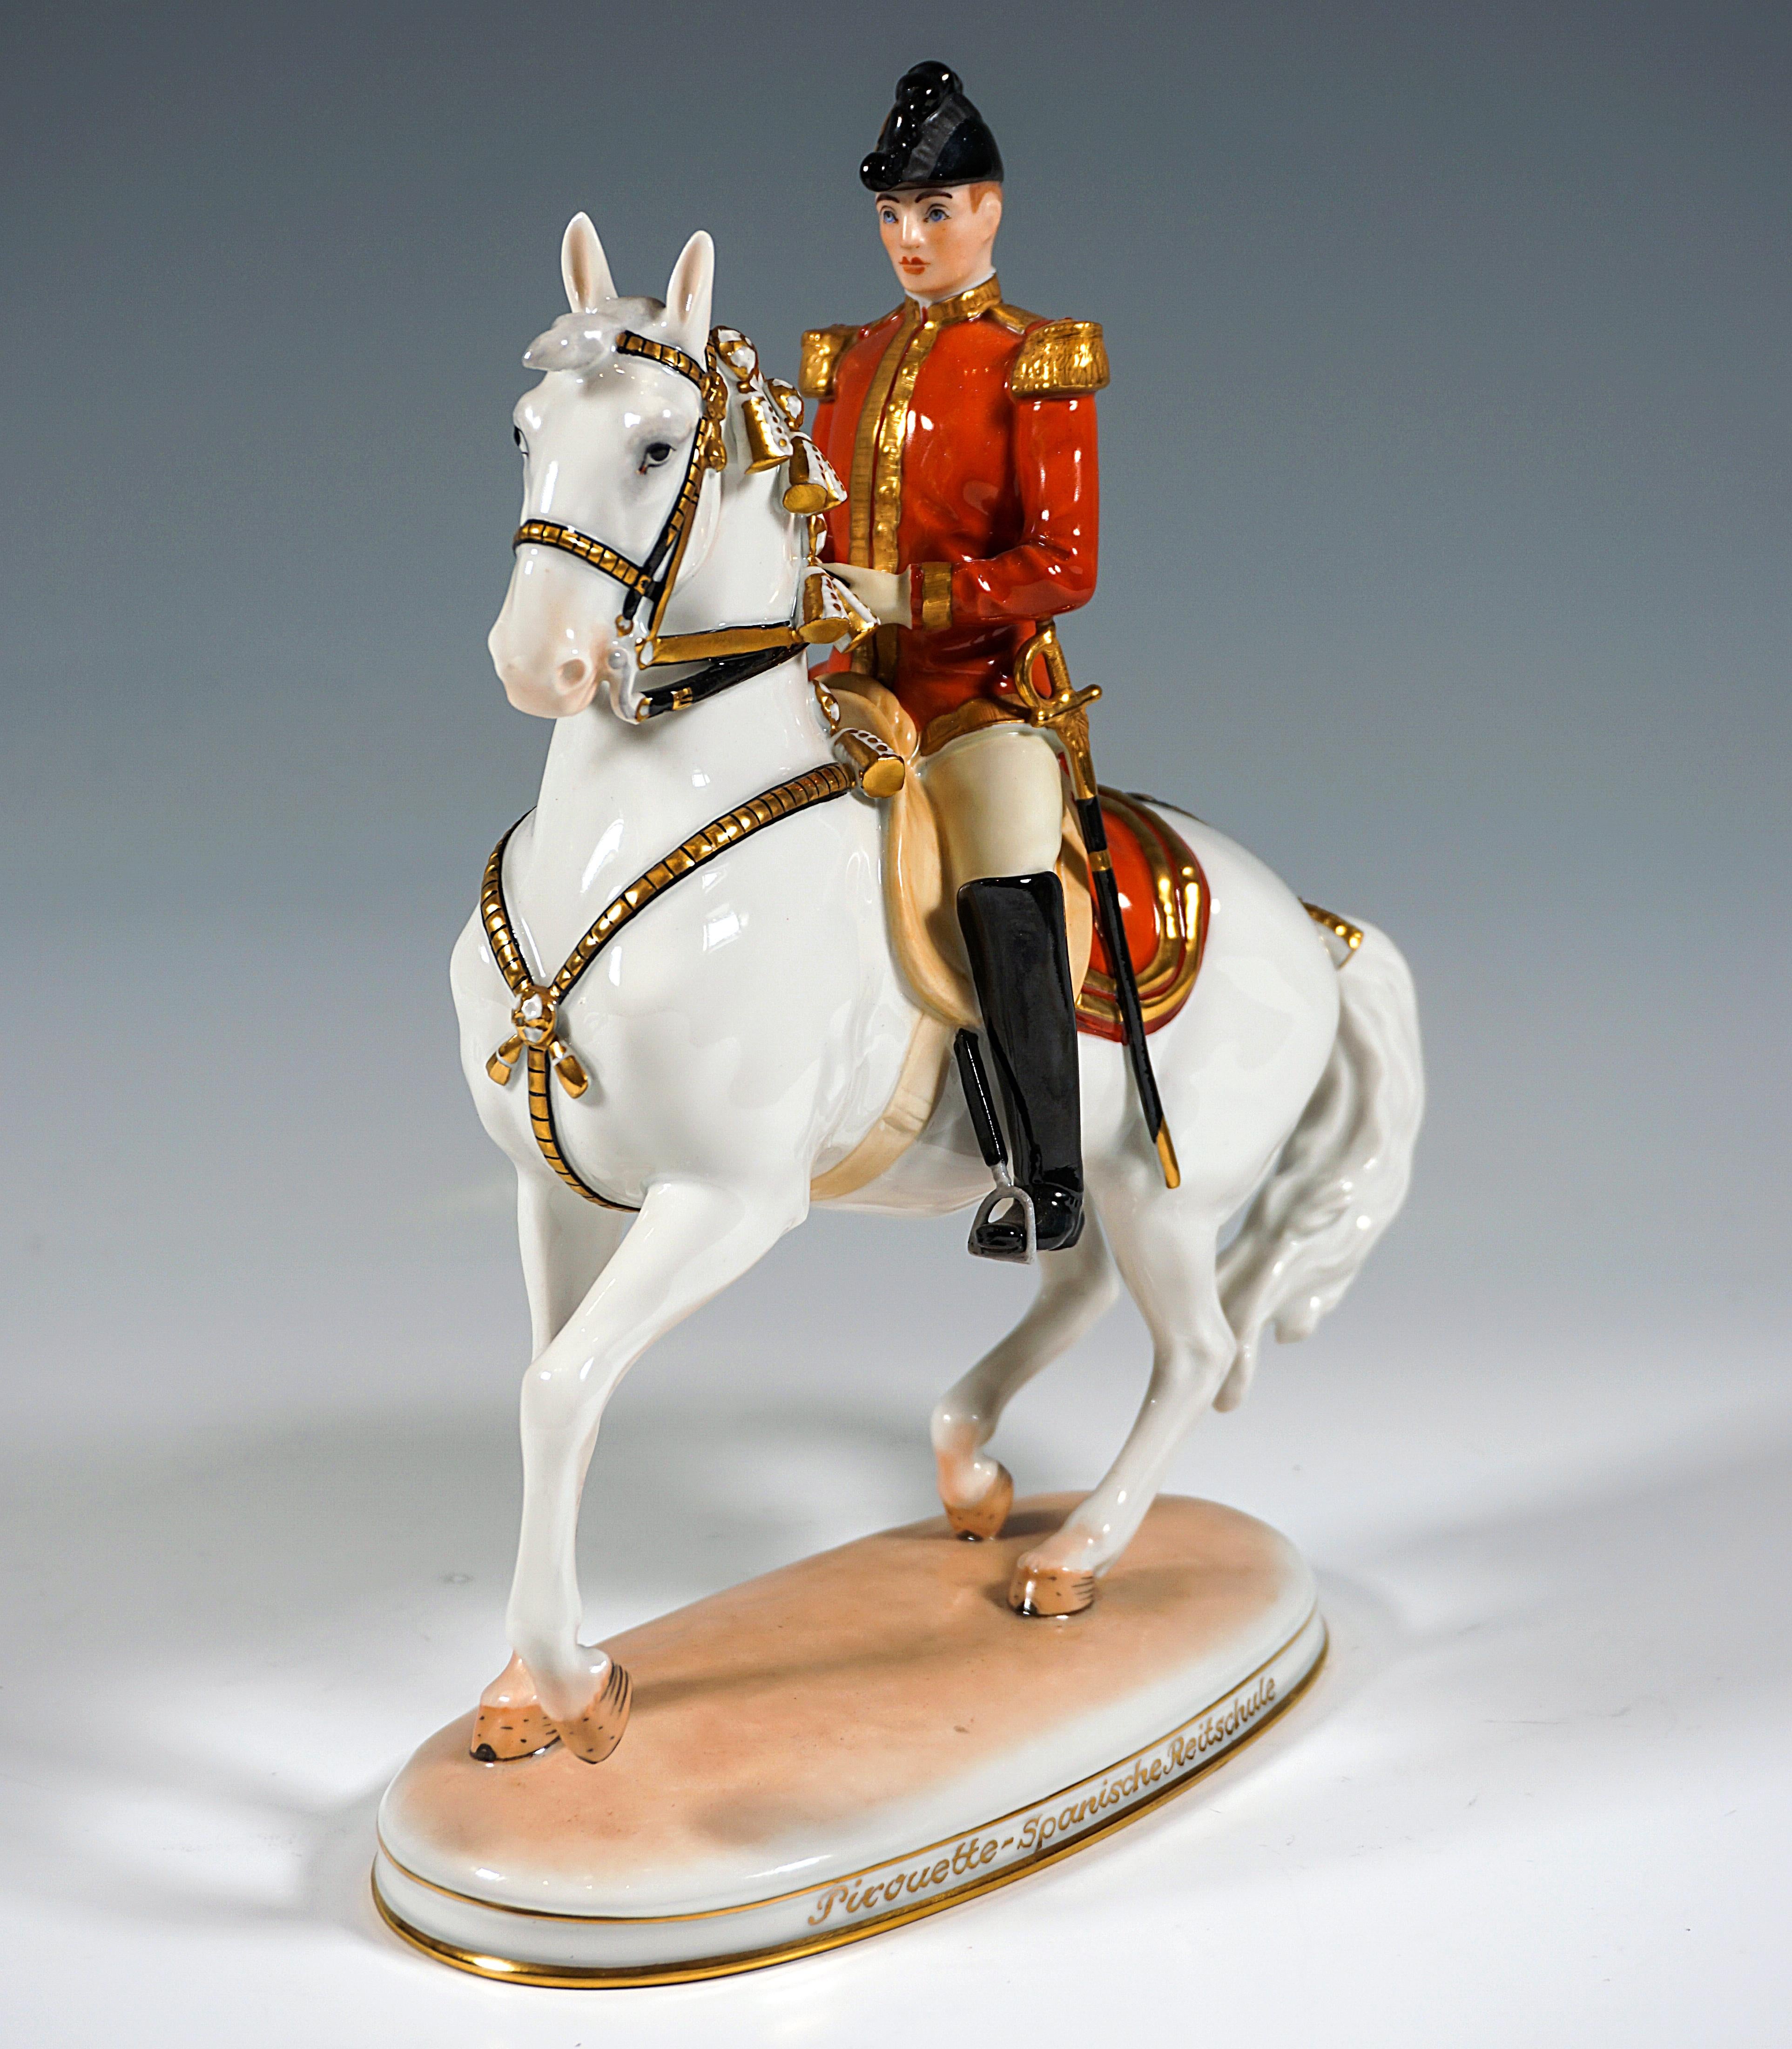 This figure of classical horsemanship is performed as a walk, canter or piaffe pirouette on two hoofbeats, with the horse's forehand moving in a circle around the hindquarters, which, however, also describe a very small circle around a center point